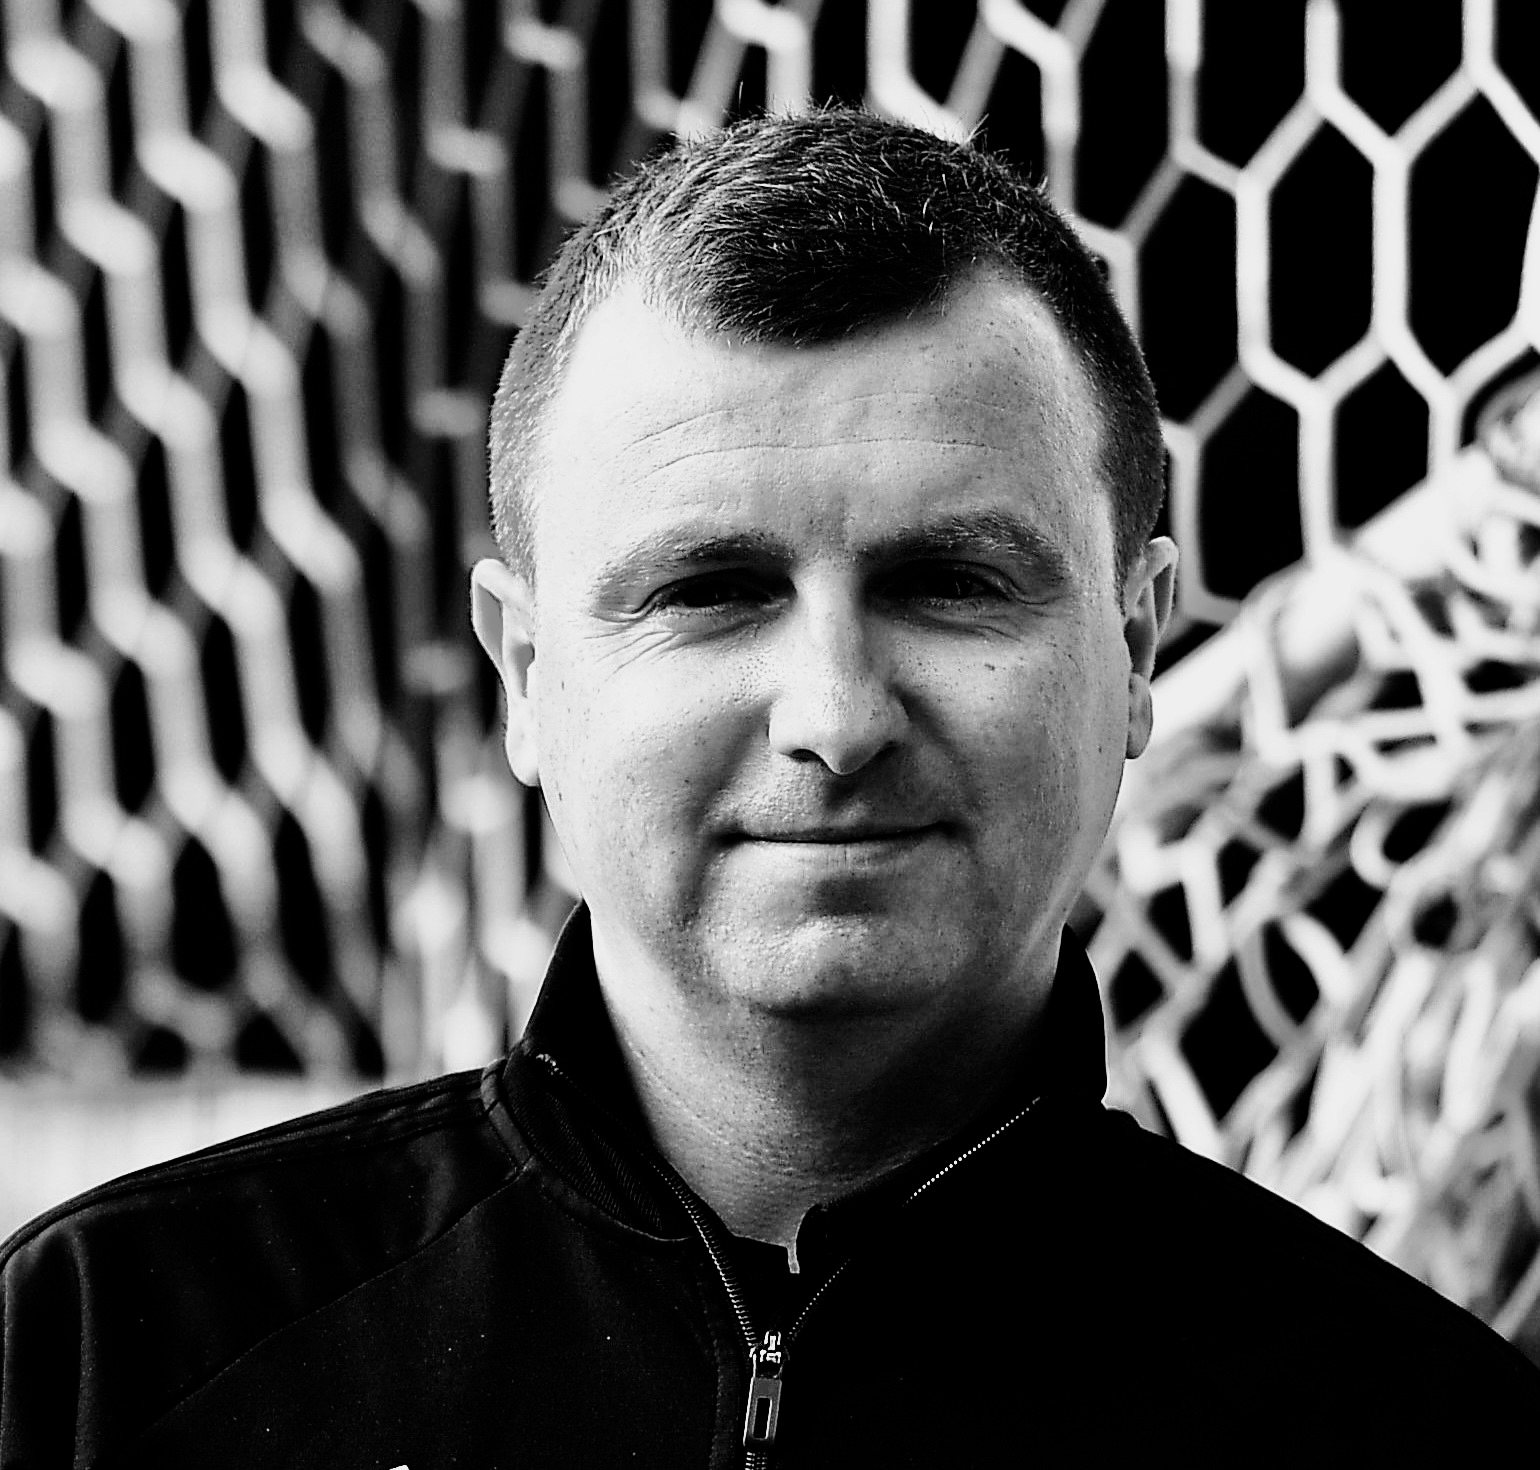 A black and white image of a man looking directly at the camera from the shoulders up. He has short dark hair and is wearing a dark zip-up jumper. In the background there is hexagonal netting.